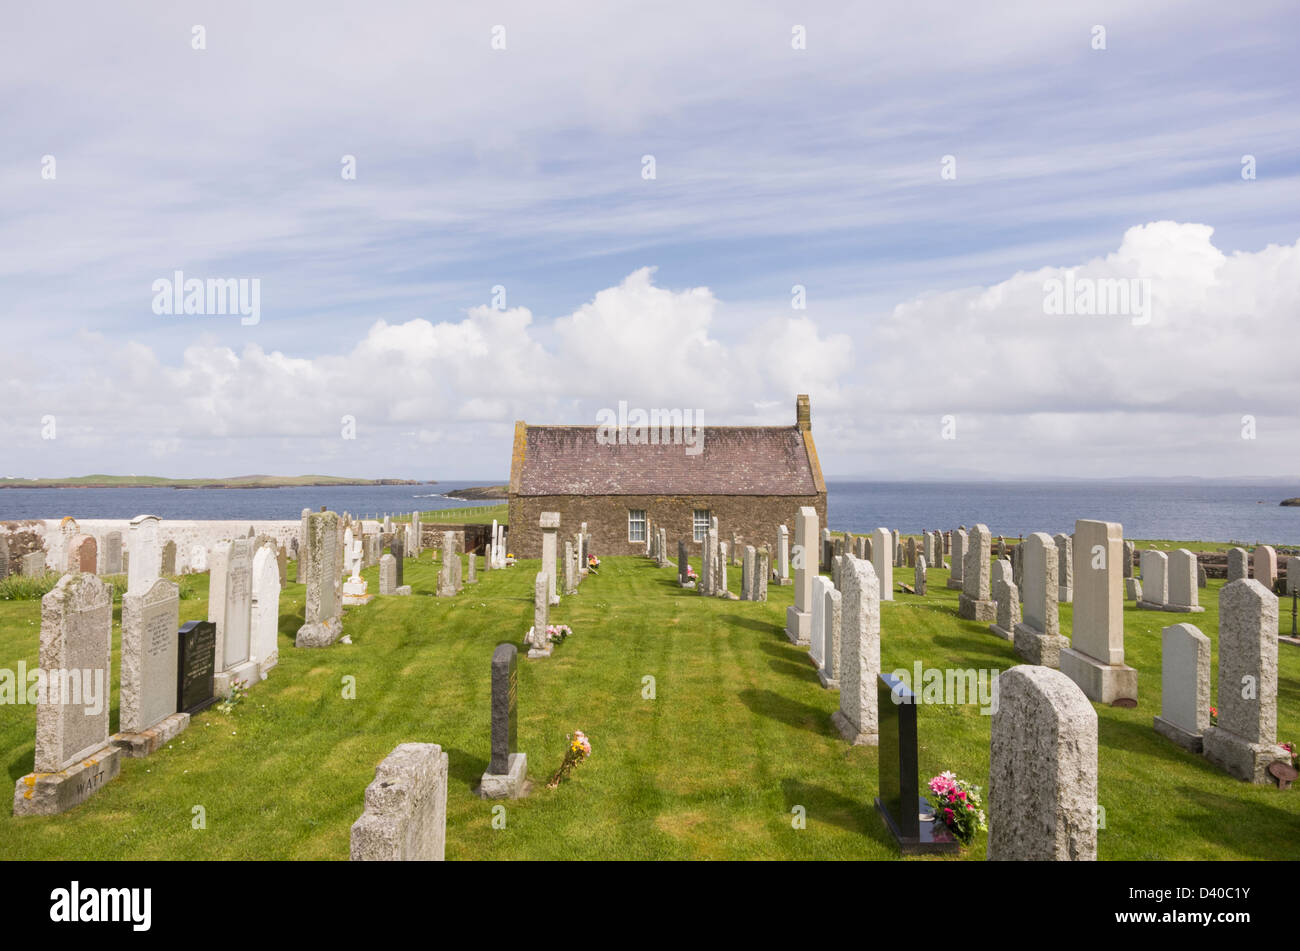 Tiny church of St Margaret's Kirk is now disused with gravestones in the churchyard on coast at Sandness, Shetland Islands, Scotland, UK Stock Photo